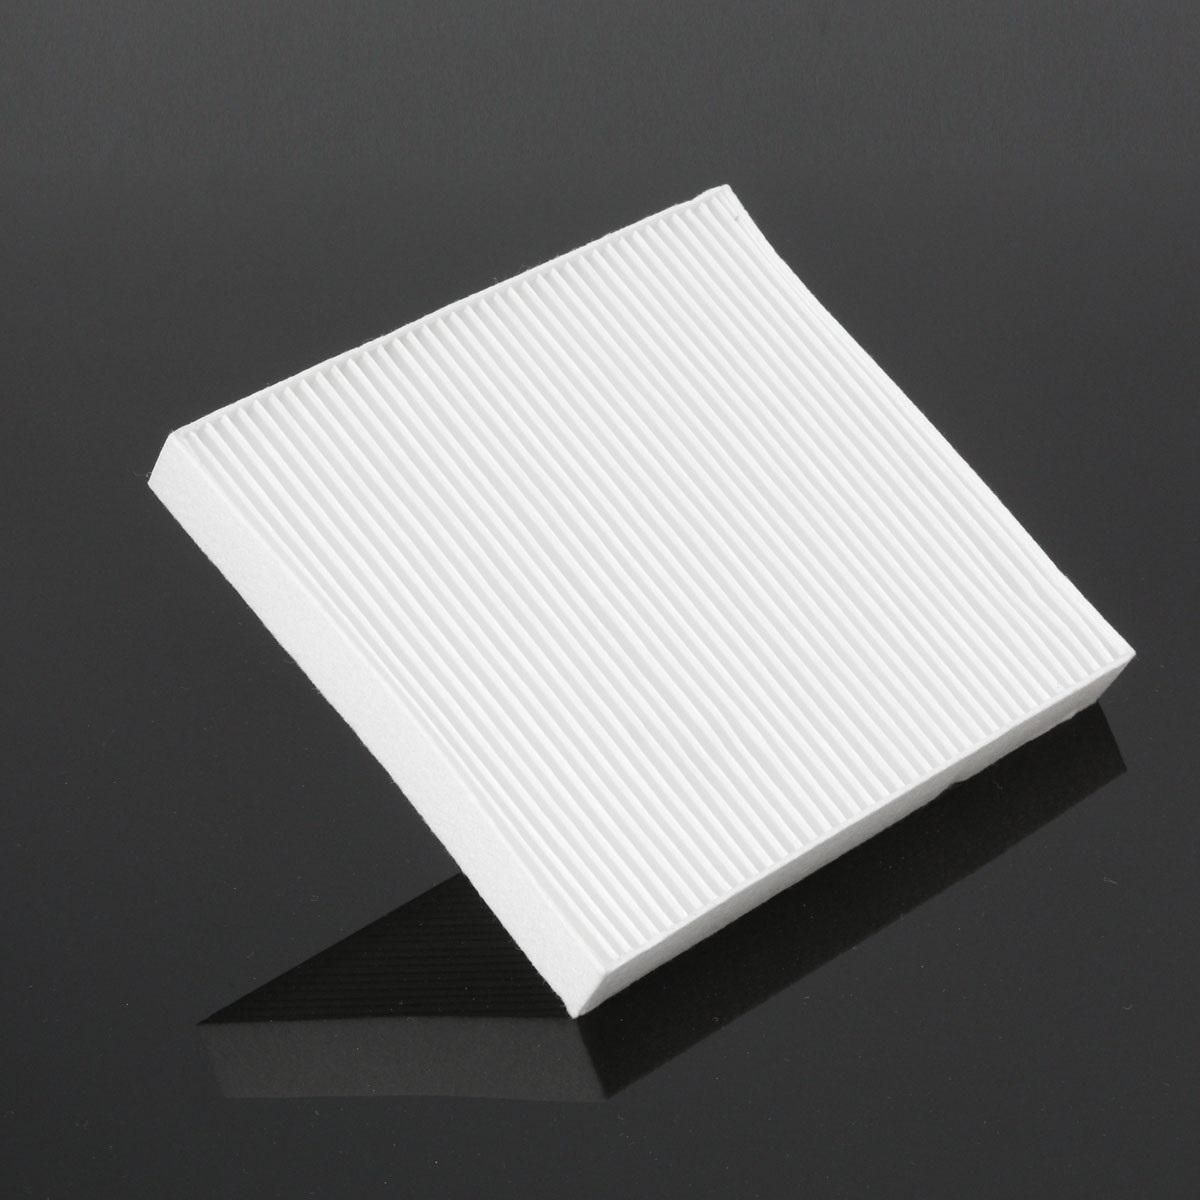 Yulicoauto AIR COND CABIN AIR FILTER for Toyota Avanza year 2004-2012